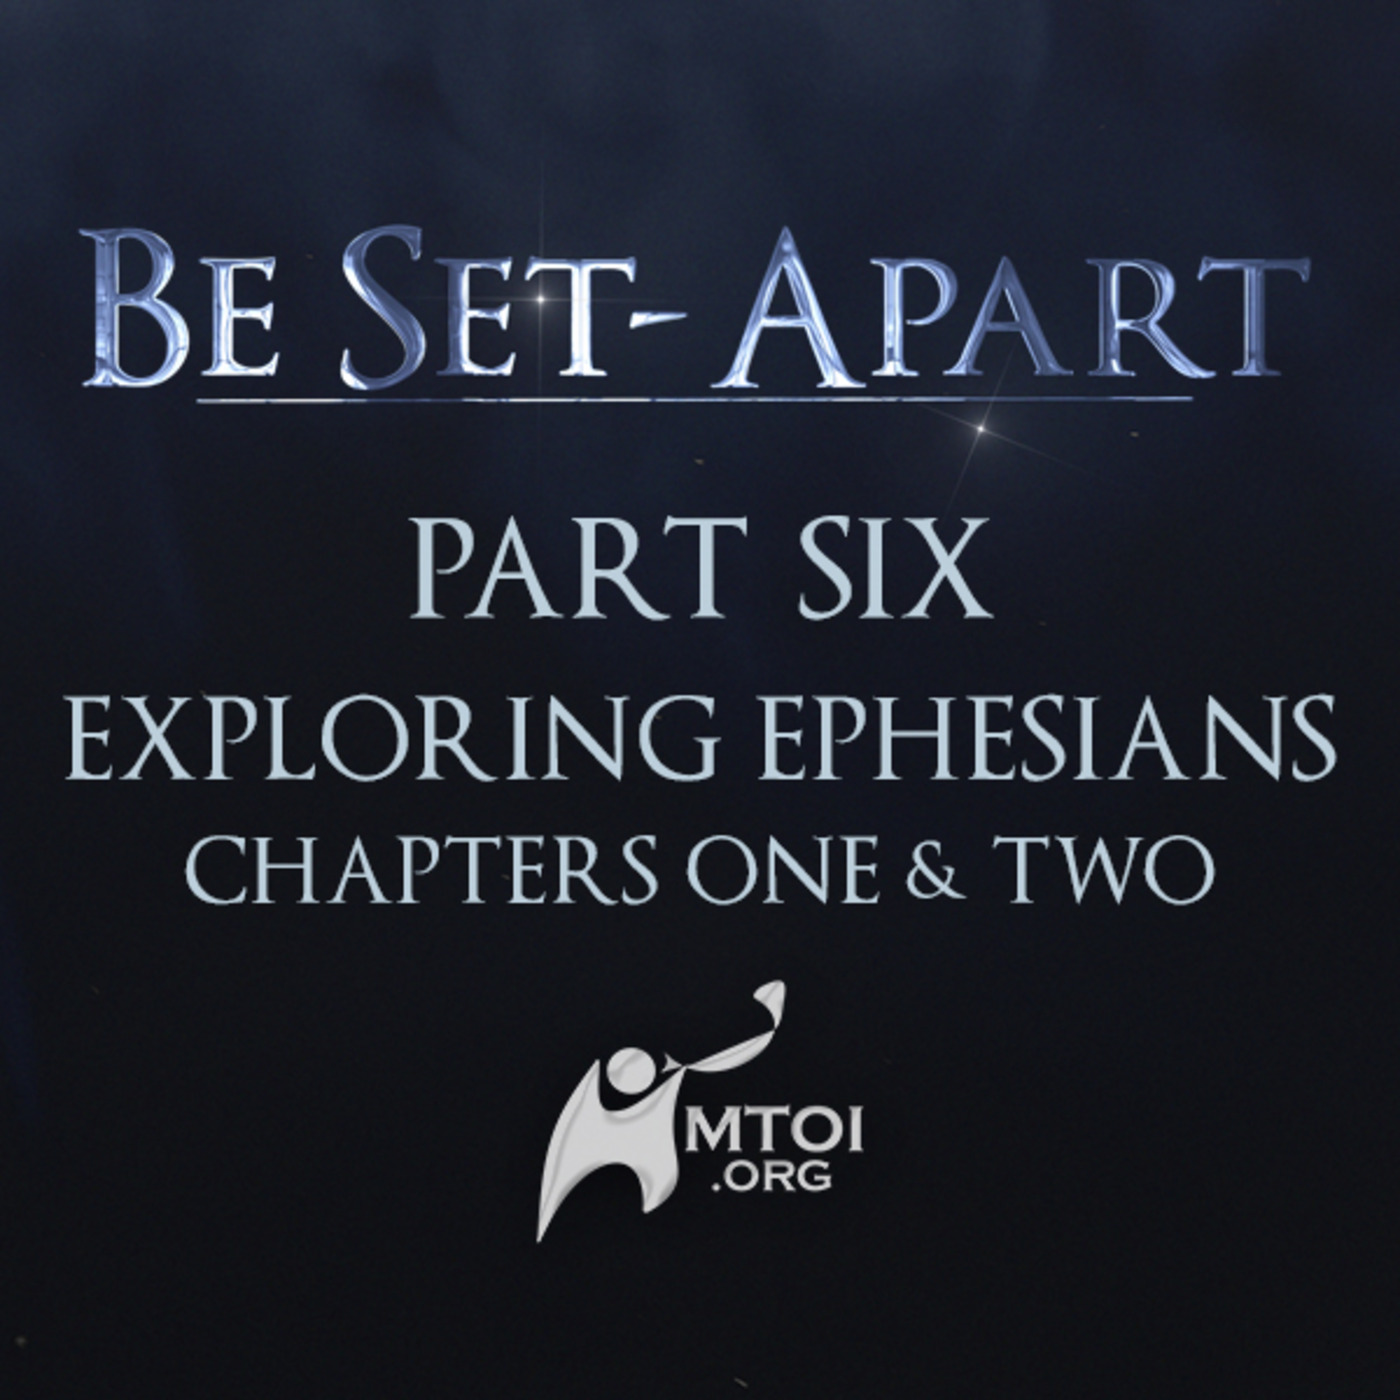 Episode 765: Be Set-Apart | Part Six | Exploring Ephesians Chapters One & Two